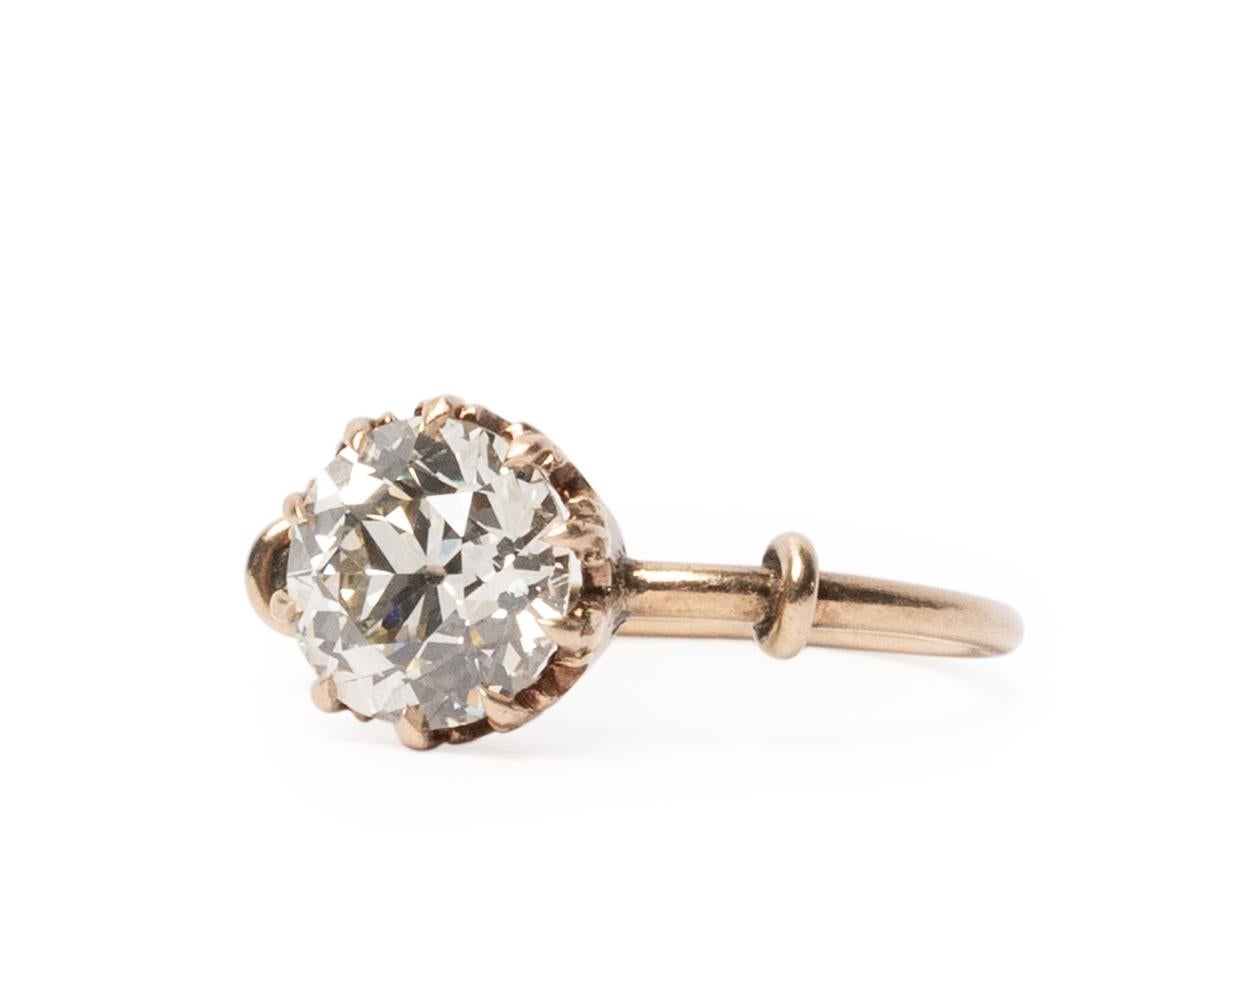 Ring Size: 4
Metal Type: 14K Yellow Gold [Hallmarked, and Tested]
Weight: 1.7 grams

Center Diamond Details:
GIA REPORT #: 2195645297
Weight: 1.54 carat
Cut: Old European Brilliant
Color: K
Clarity: VS1

Finger to Top of Stone Measurement: